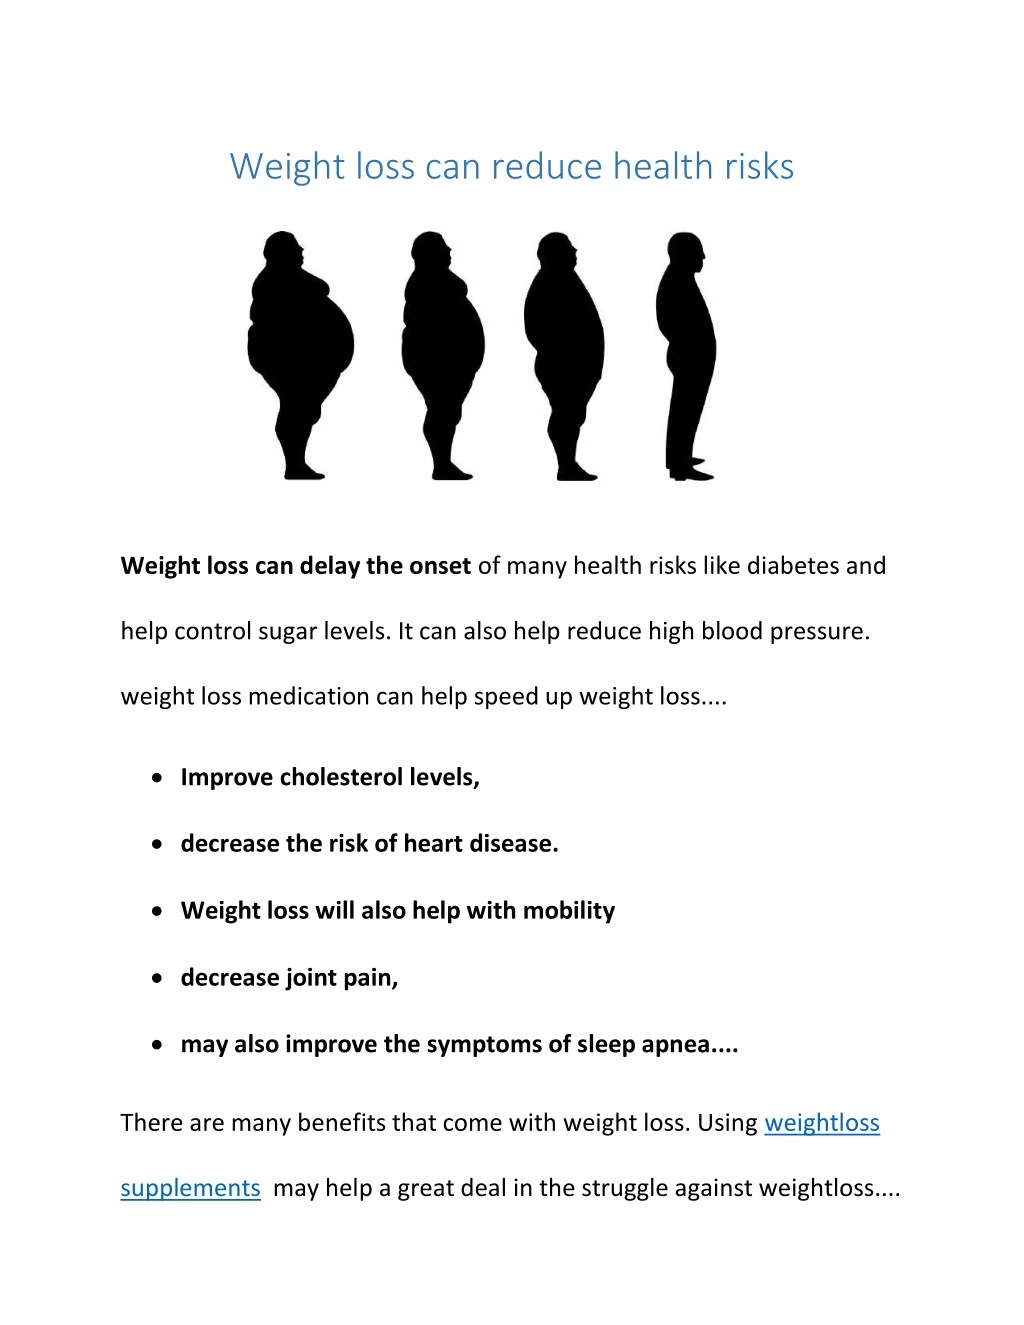 weight loss can reduce health risks